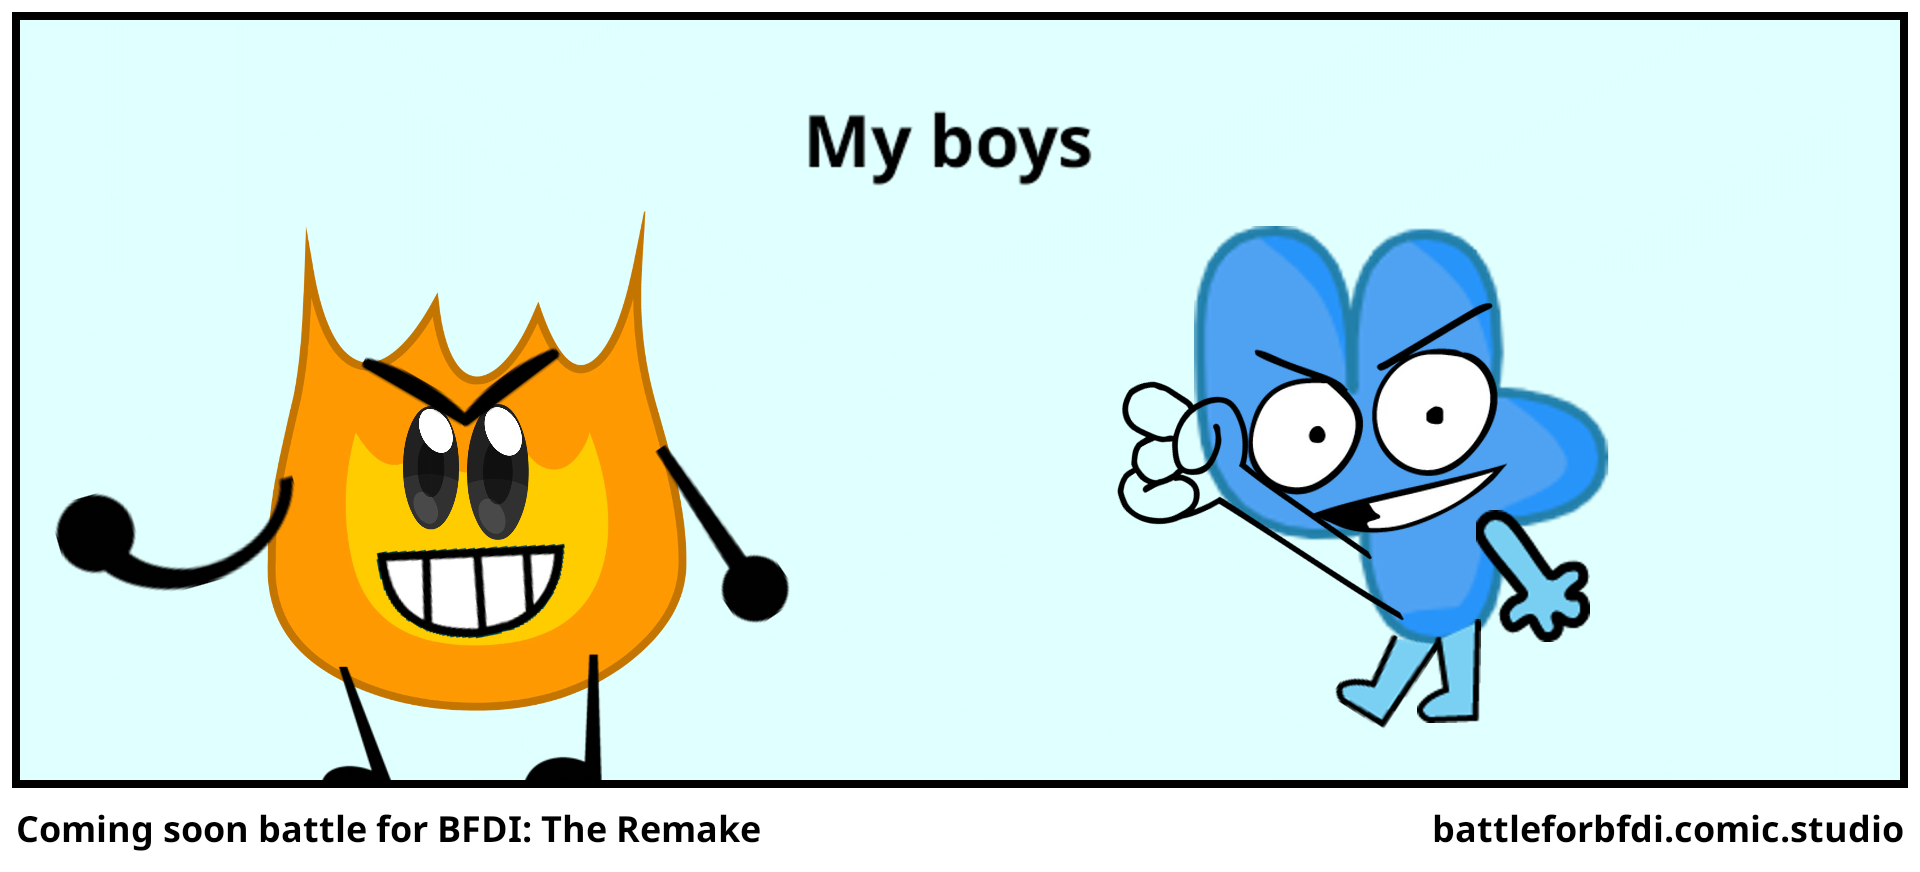 Coming soon battle for BFDI: The Remake